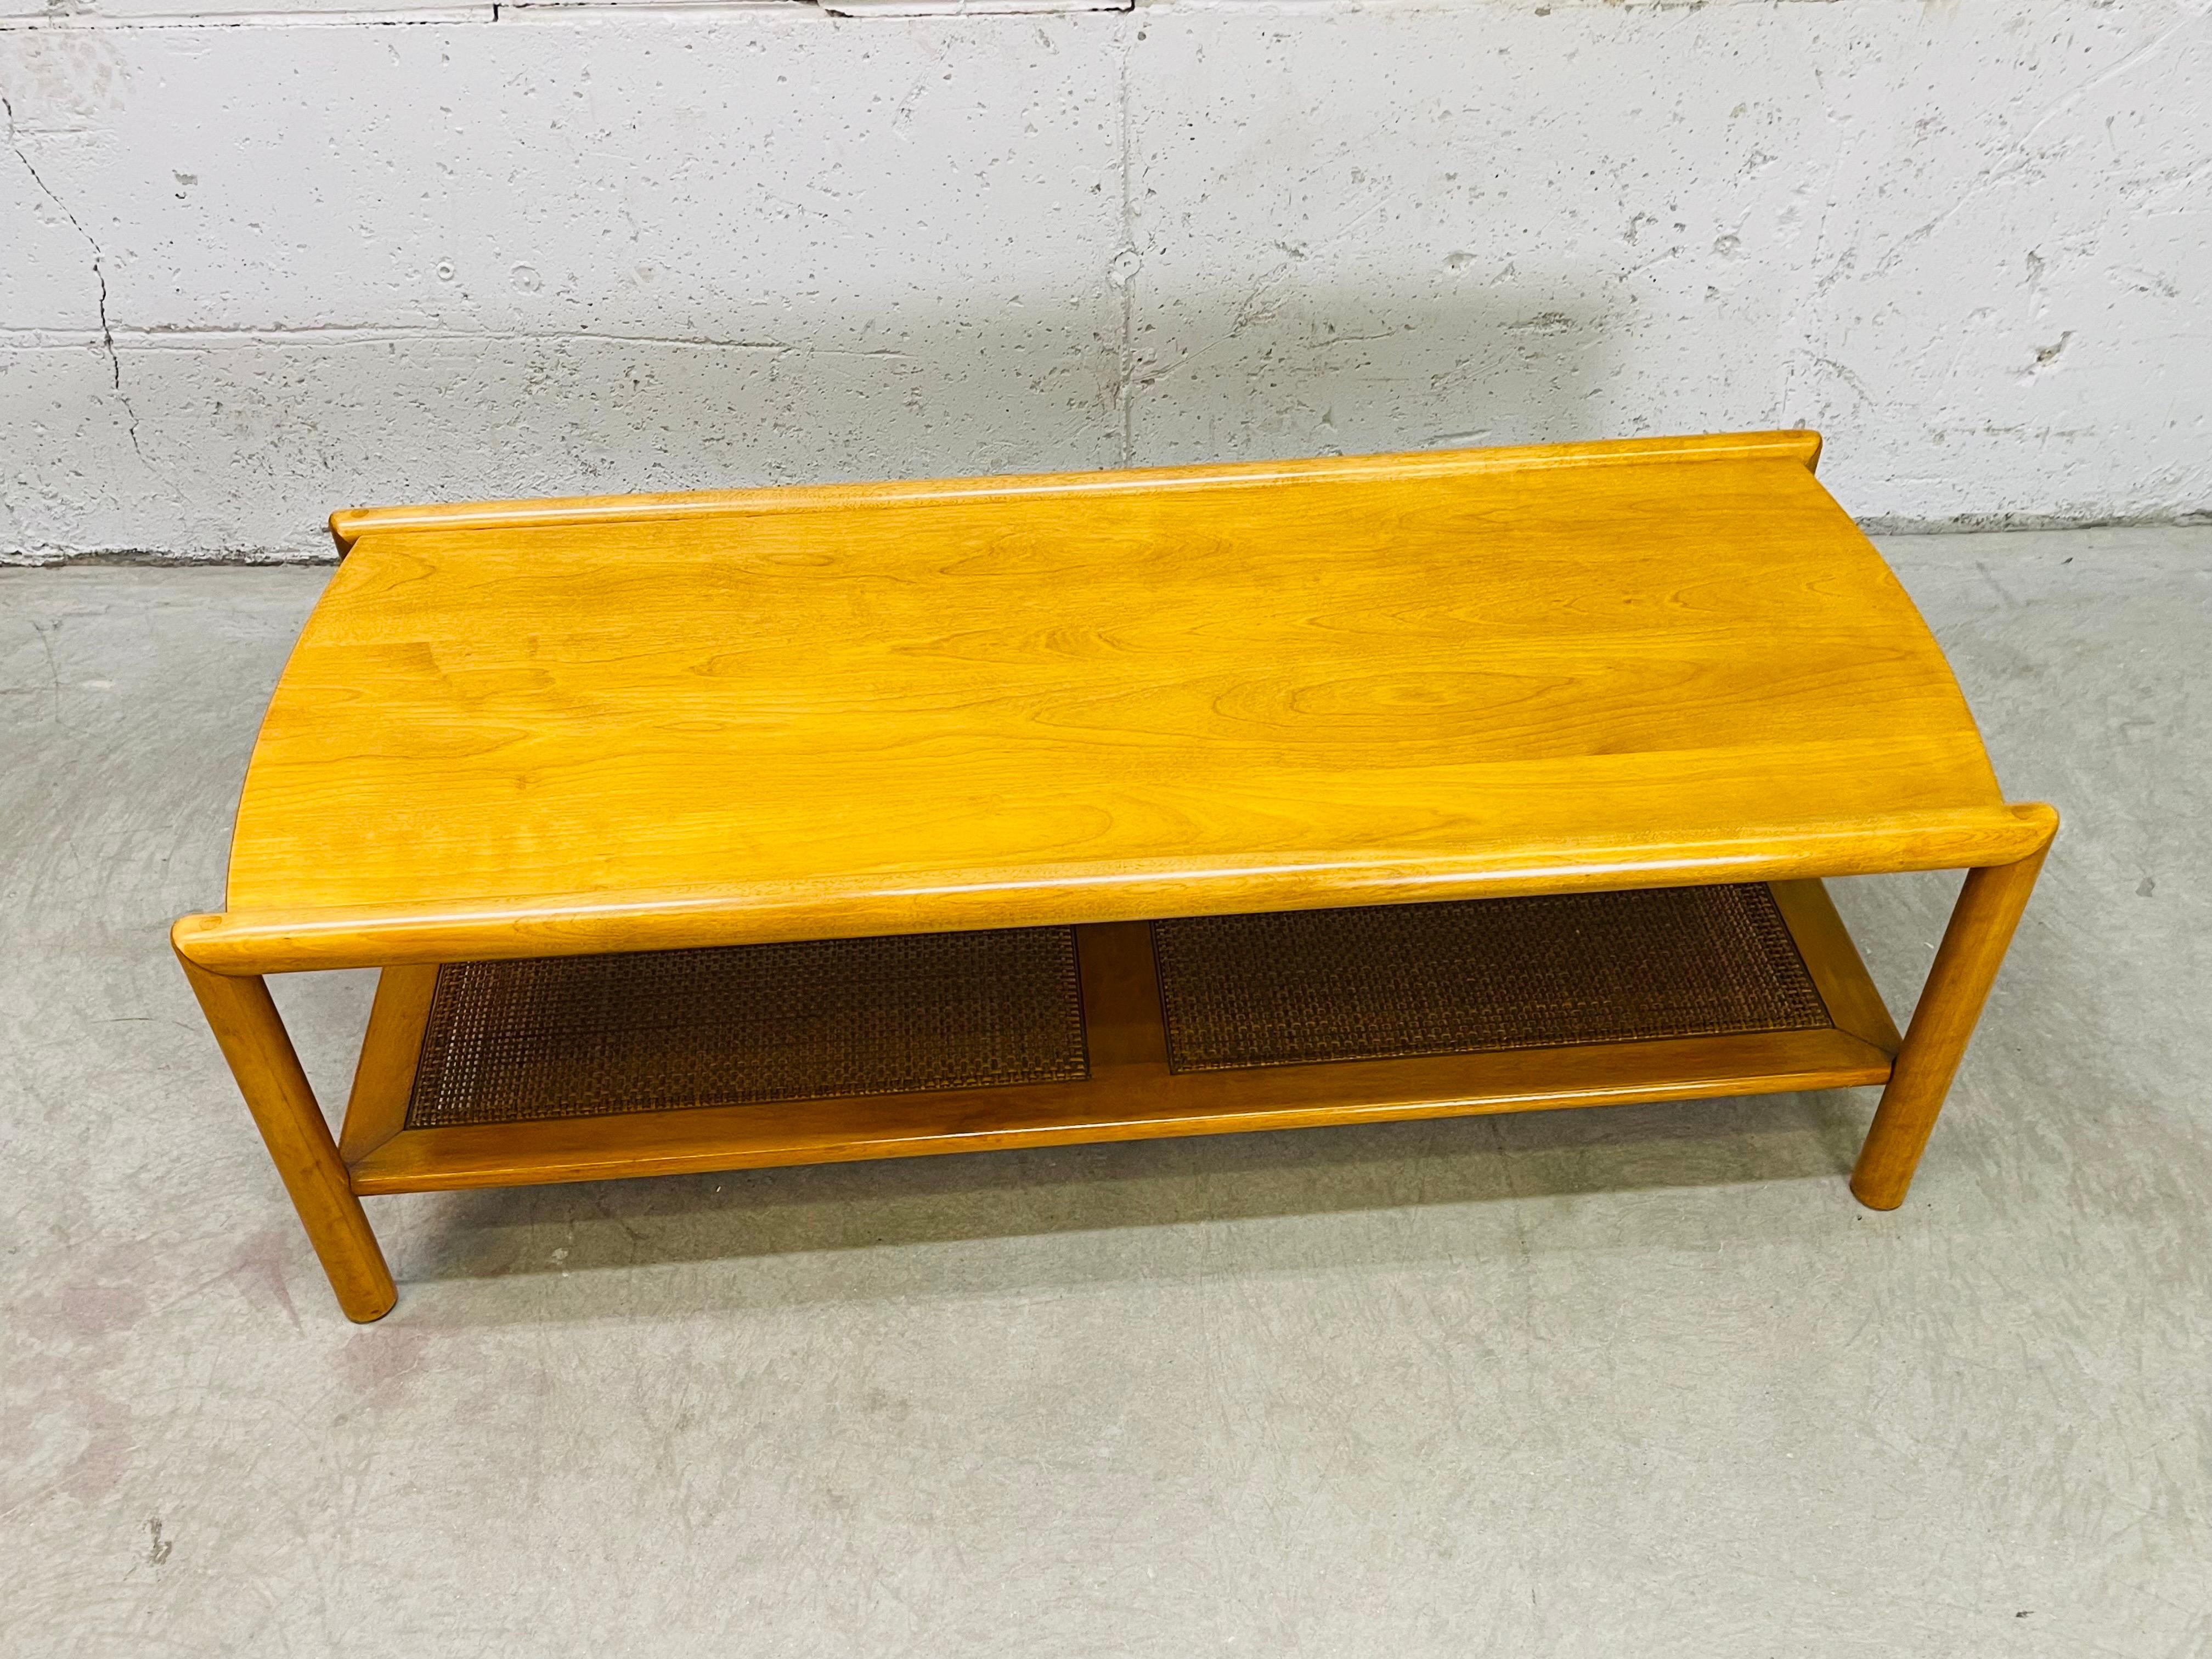 Vintage 1960s Conant Ball maple wood rectangular coffee table with wicker shelf. The shelf has two wicker panels for additional storage. Wicker is in excellent condition. Top of the table shows the peg style joinery. Excellent condition. Marked